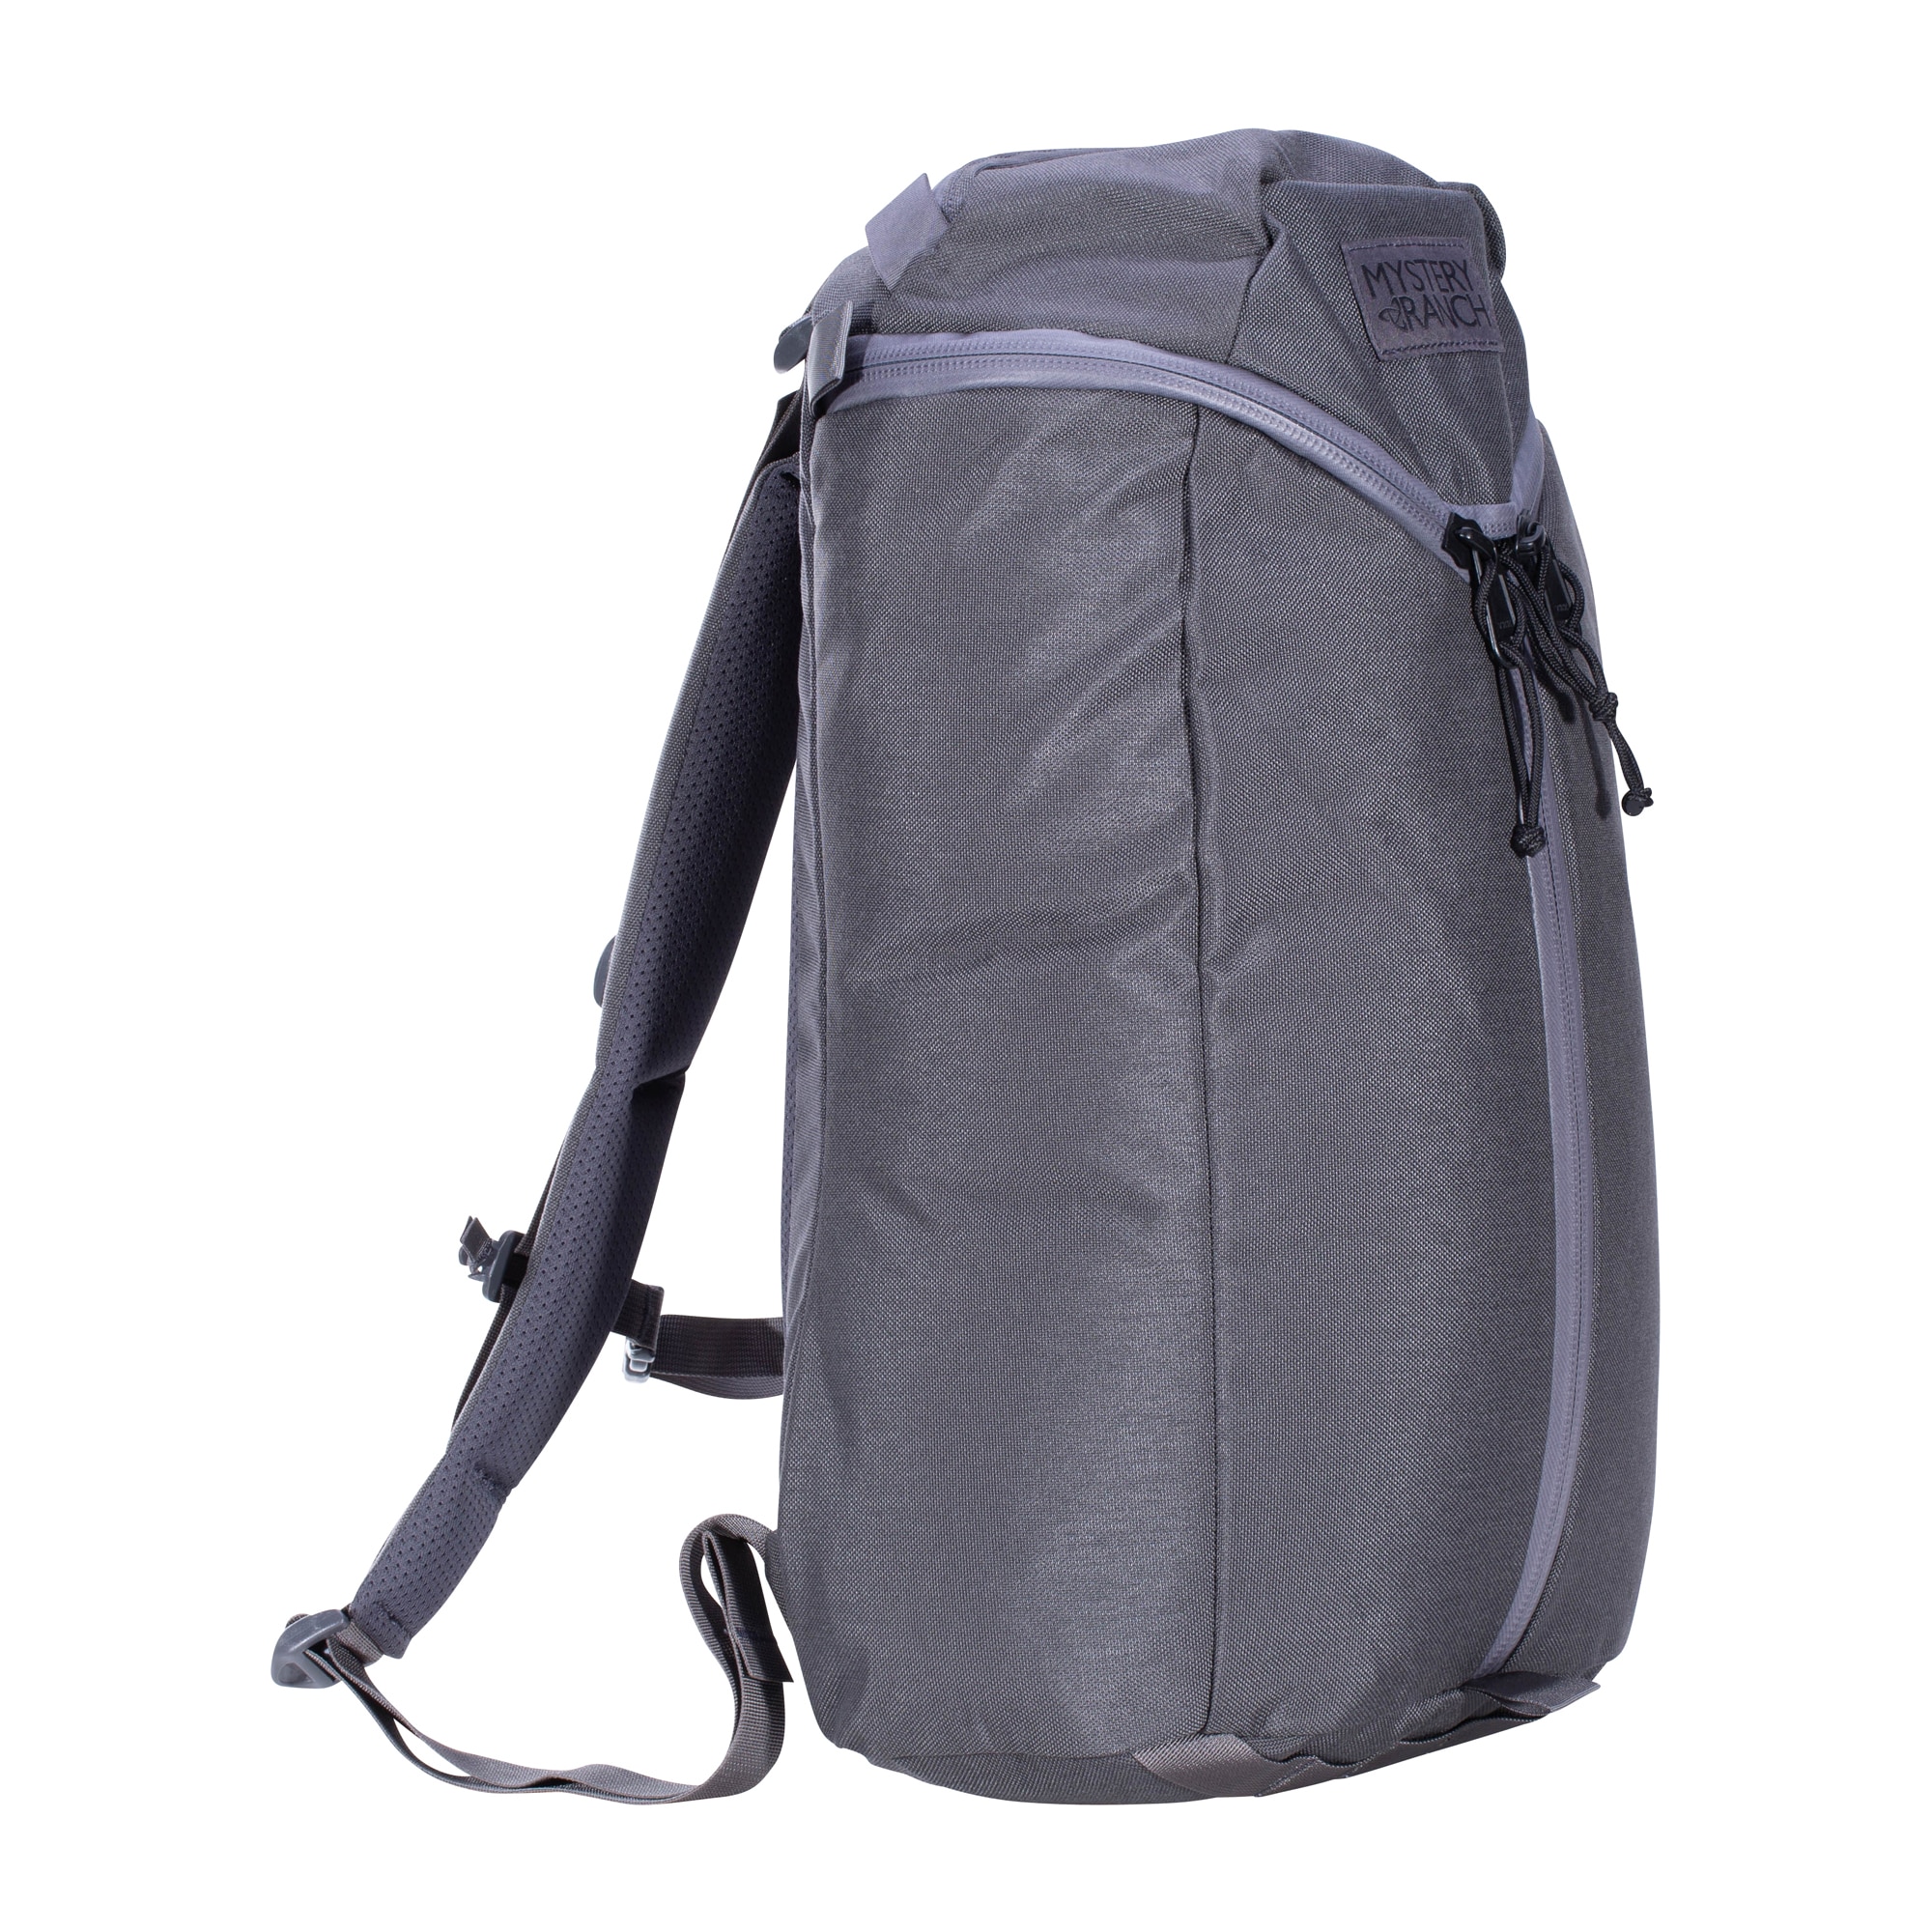 Purchase the Mystery Ranch Backpack Urban Assault 21 shadow 1000